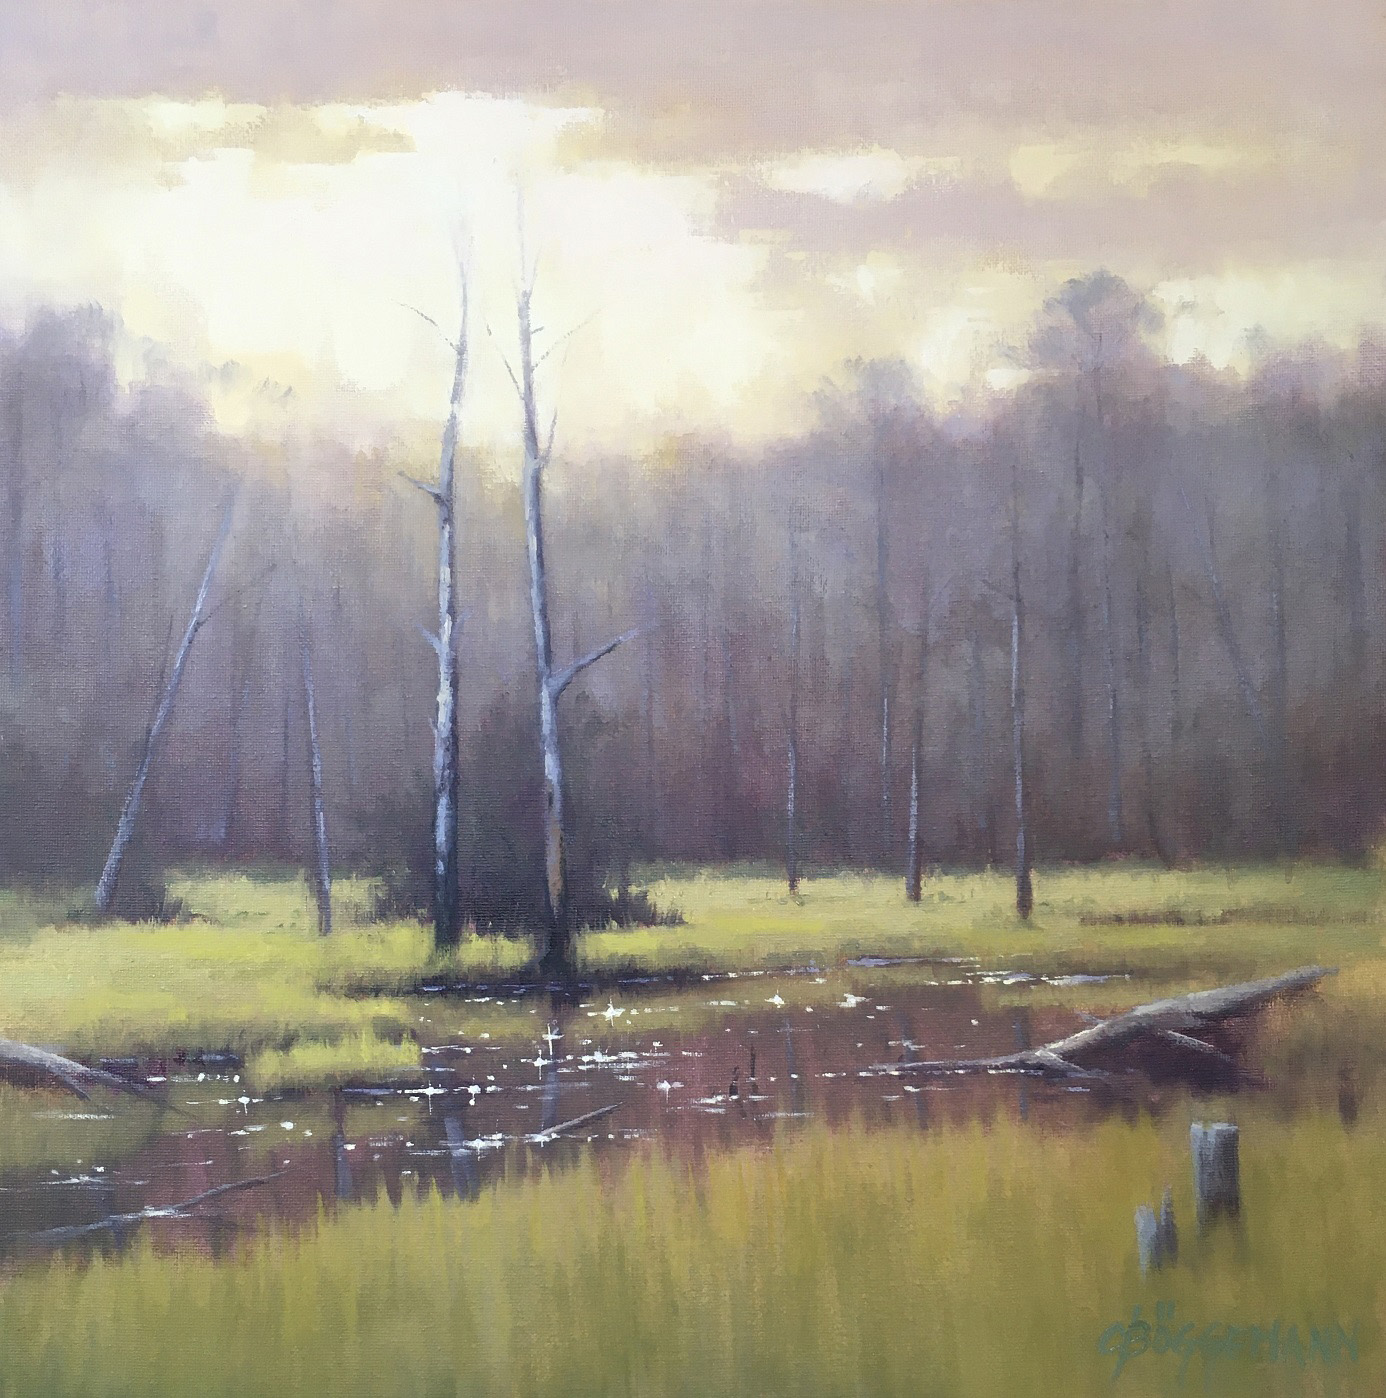 Painting of a swamp with dead trees standing tall